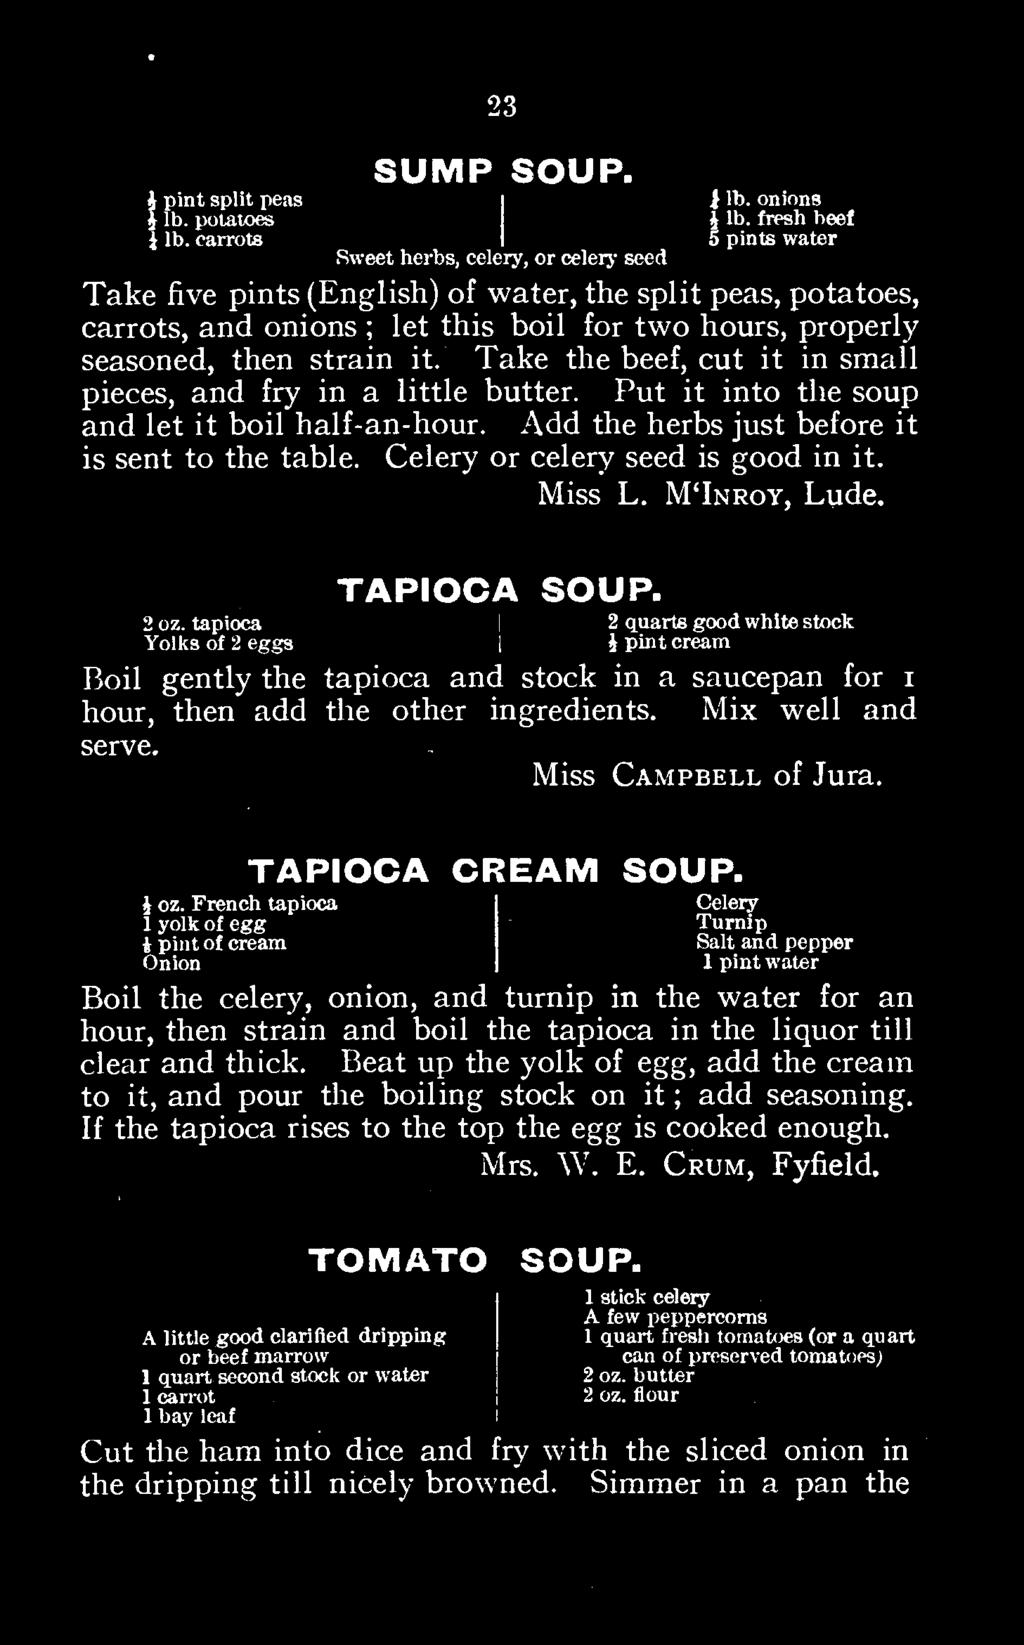 tapioca of 2 eggs I 2 J pint quarts cream good white stock Boil gently the tapioca and stock in a saucepan for i hour, then add the other ingredients. Mix well and serve. Miss Campbell of Jura.